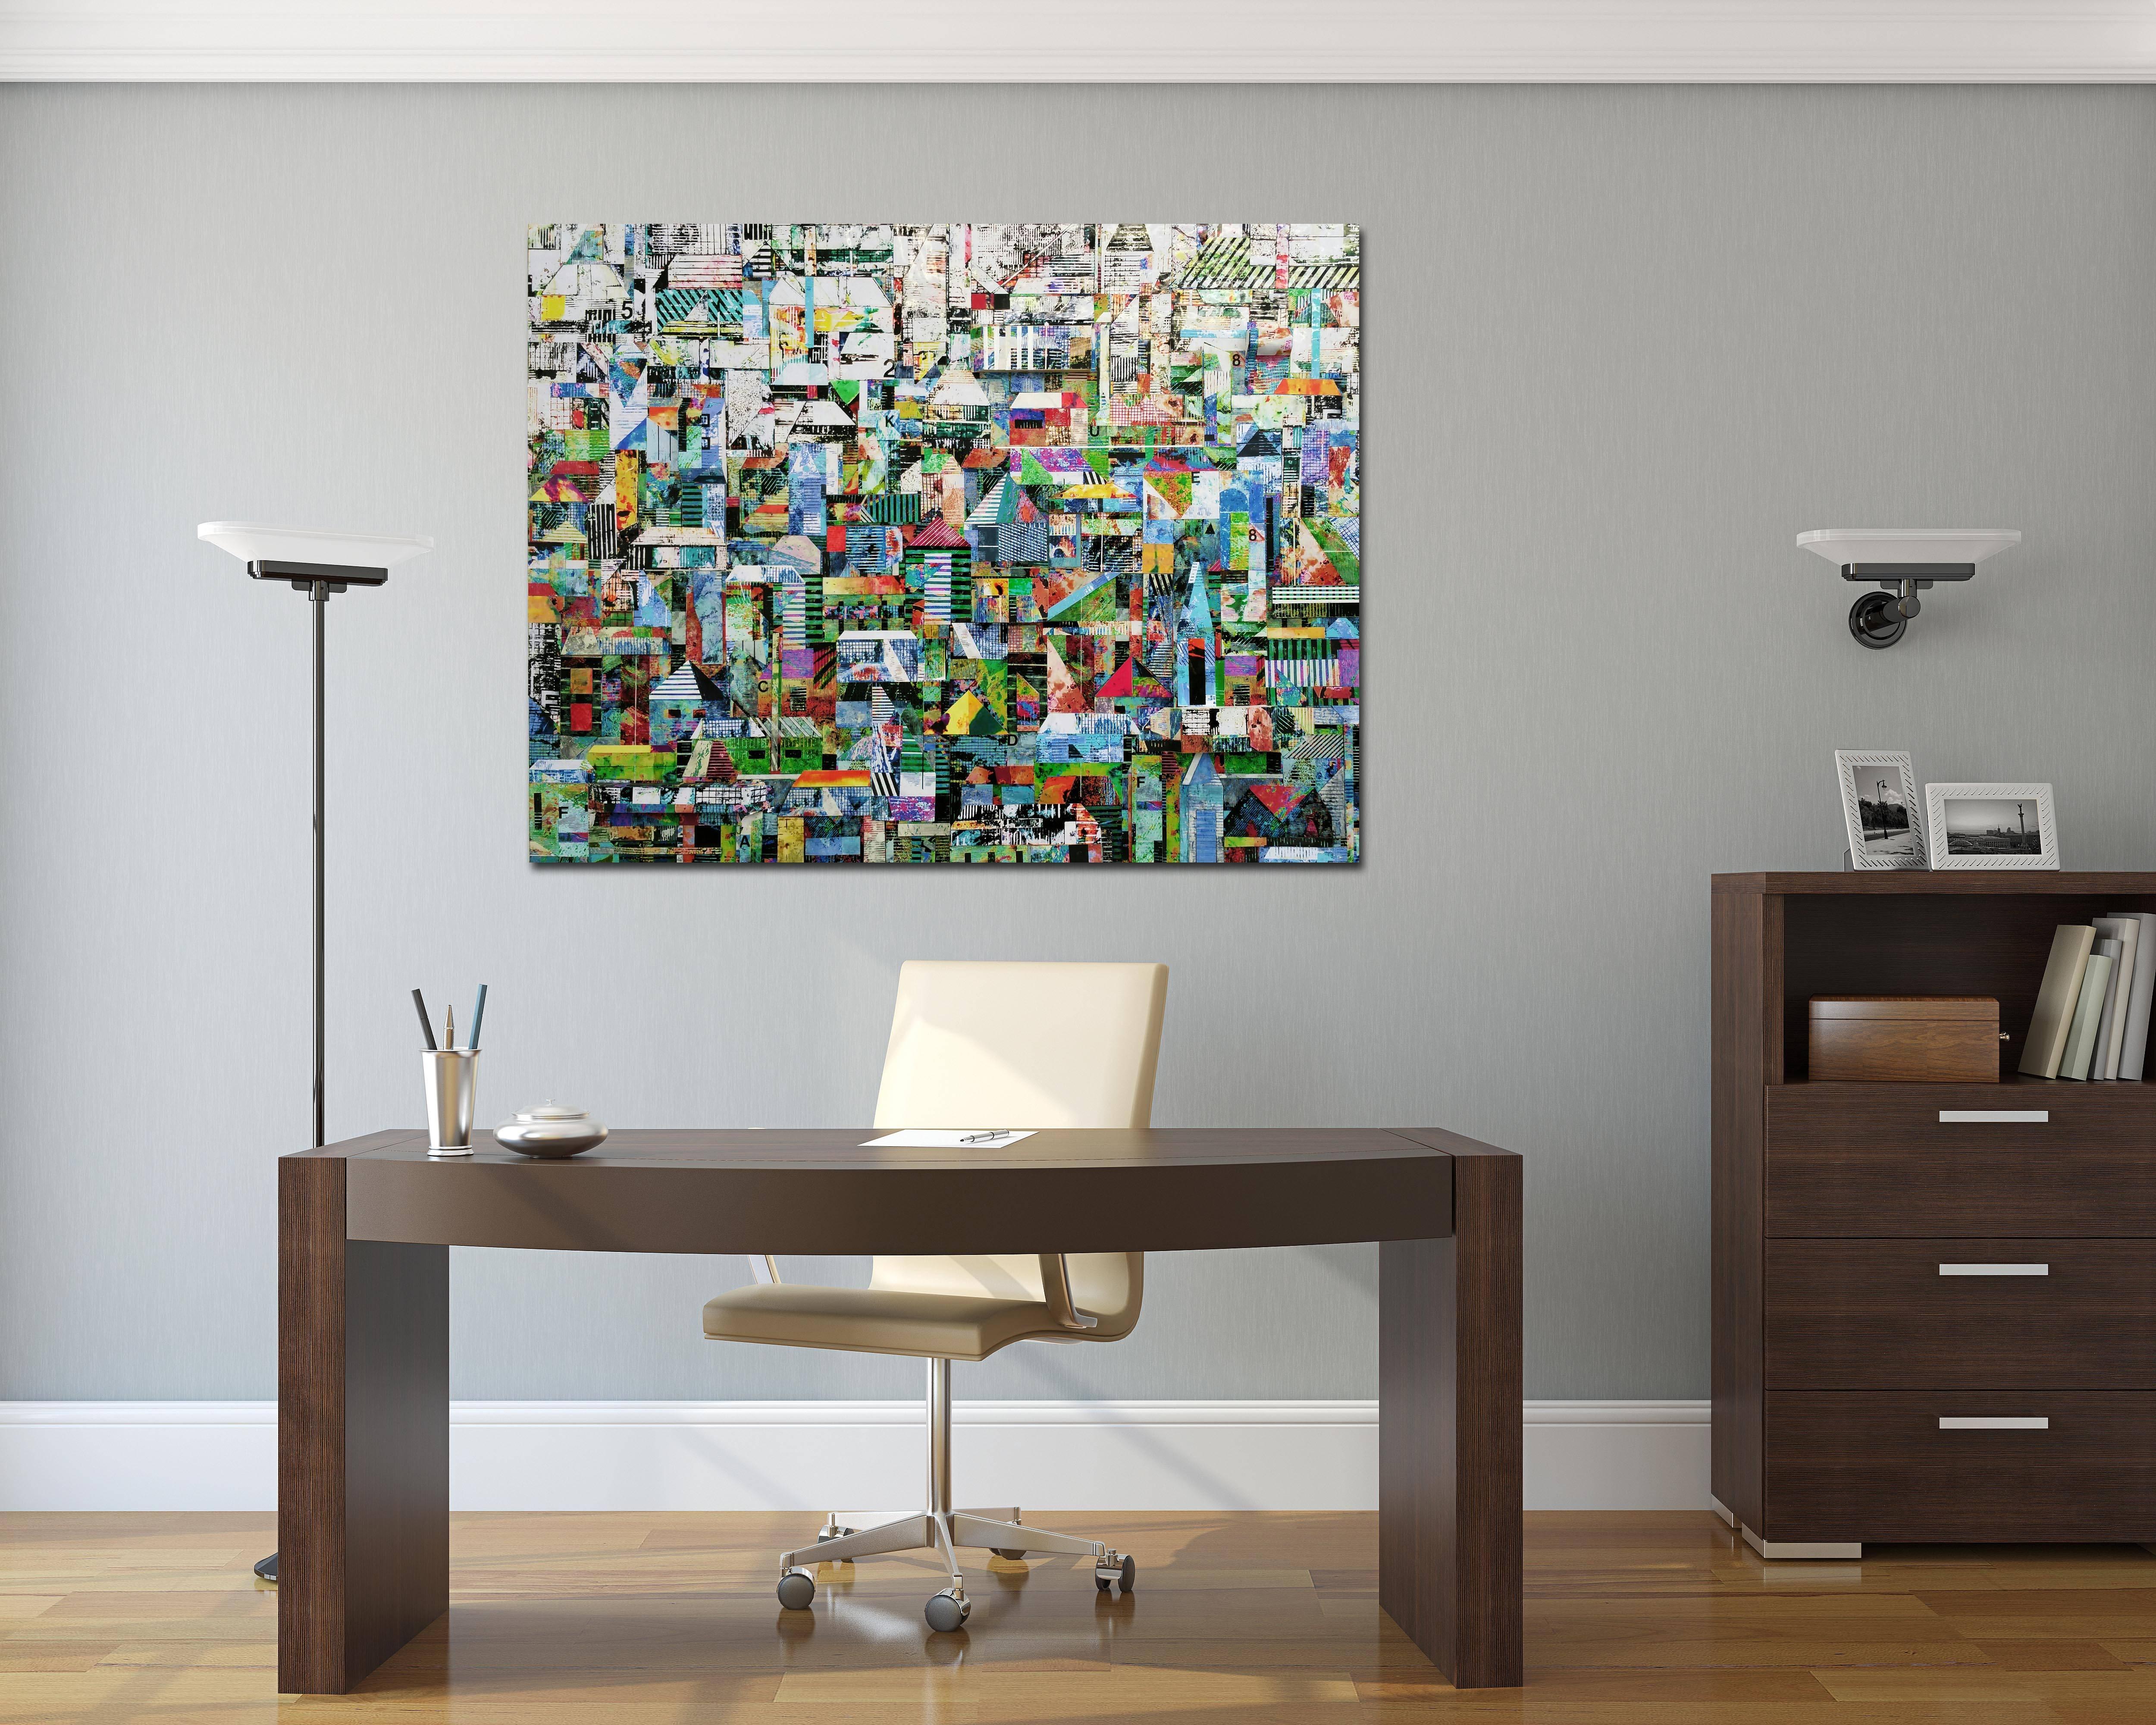 Sublime 709 - Green Colorful Original Photographic Collage Mixed Media Artwork - Contemporary Painting by Tae Ho Kang